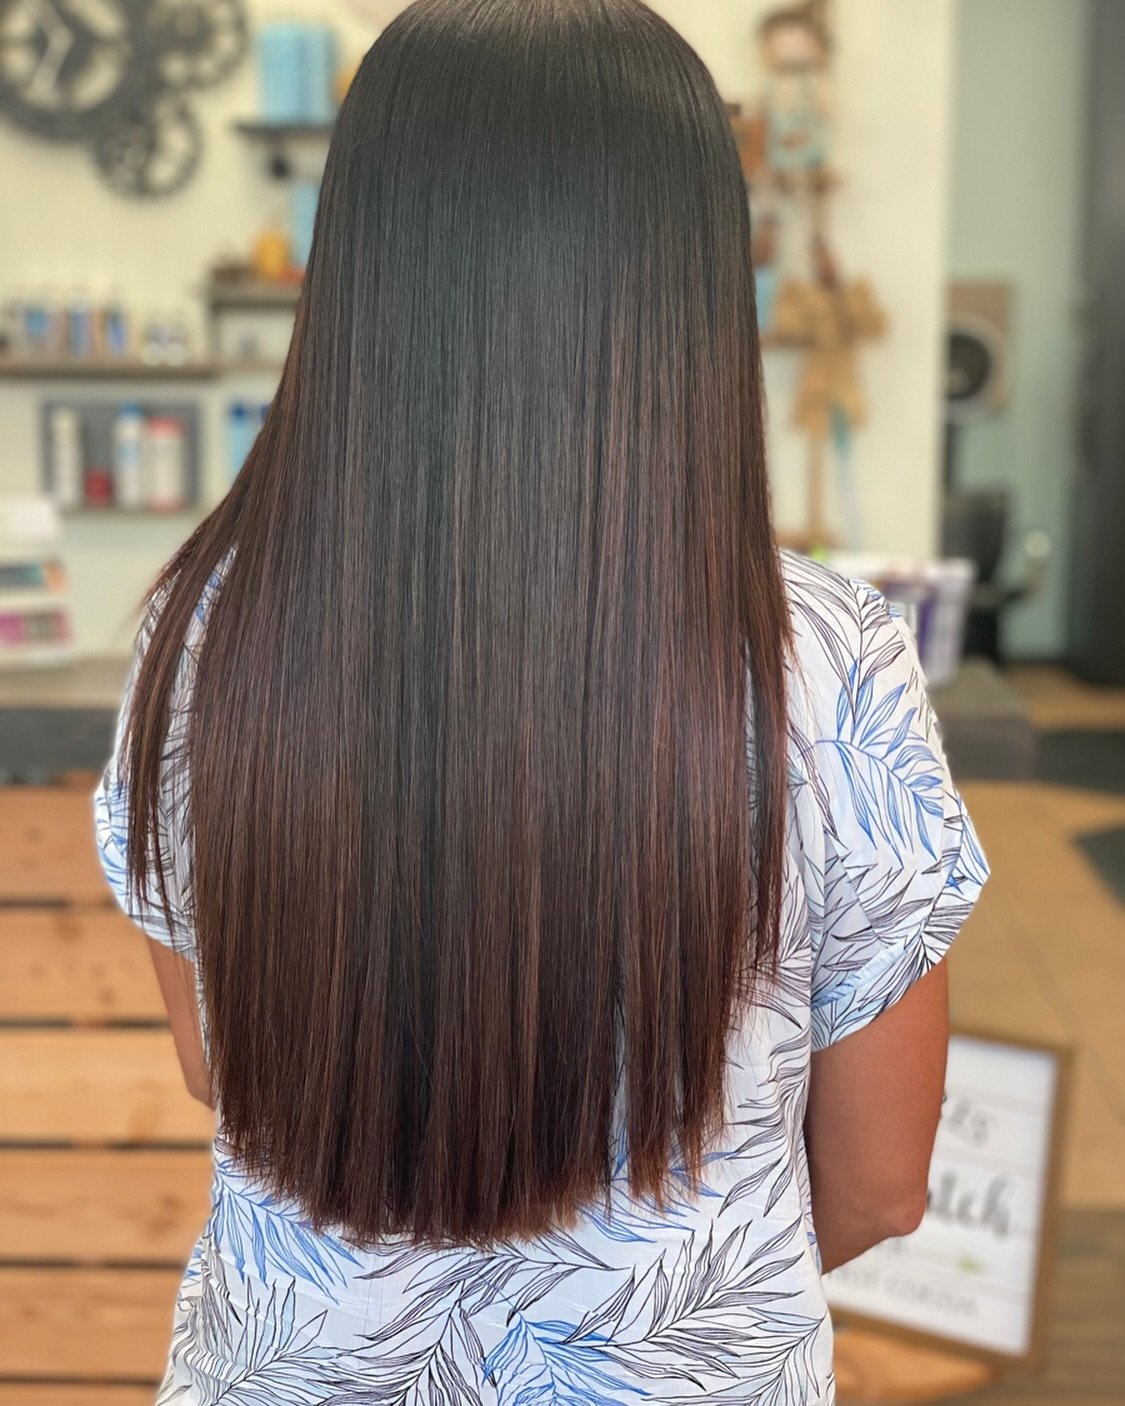 A subtle balayage (hand painted) highlight color, a keratin treatment to help smooth frizz in the FL humidity &amp; a good trim.  To book your appointment with me, click the link in my bio. #floridastylist #centralflorida #balayage #keratintreatment 